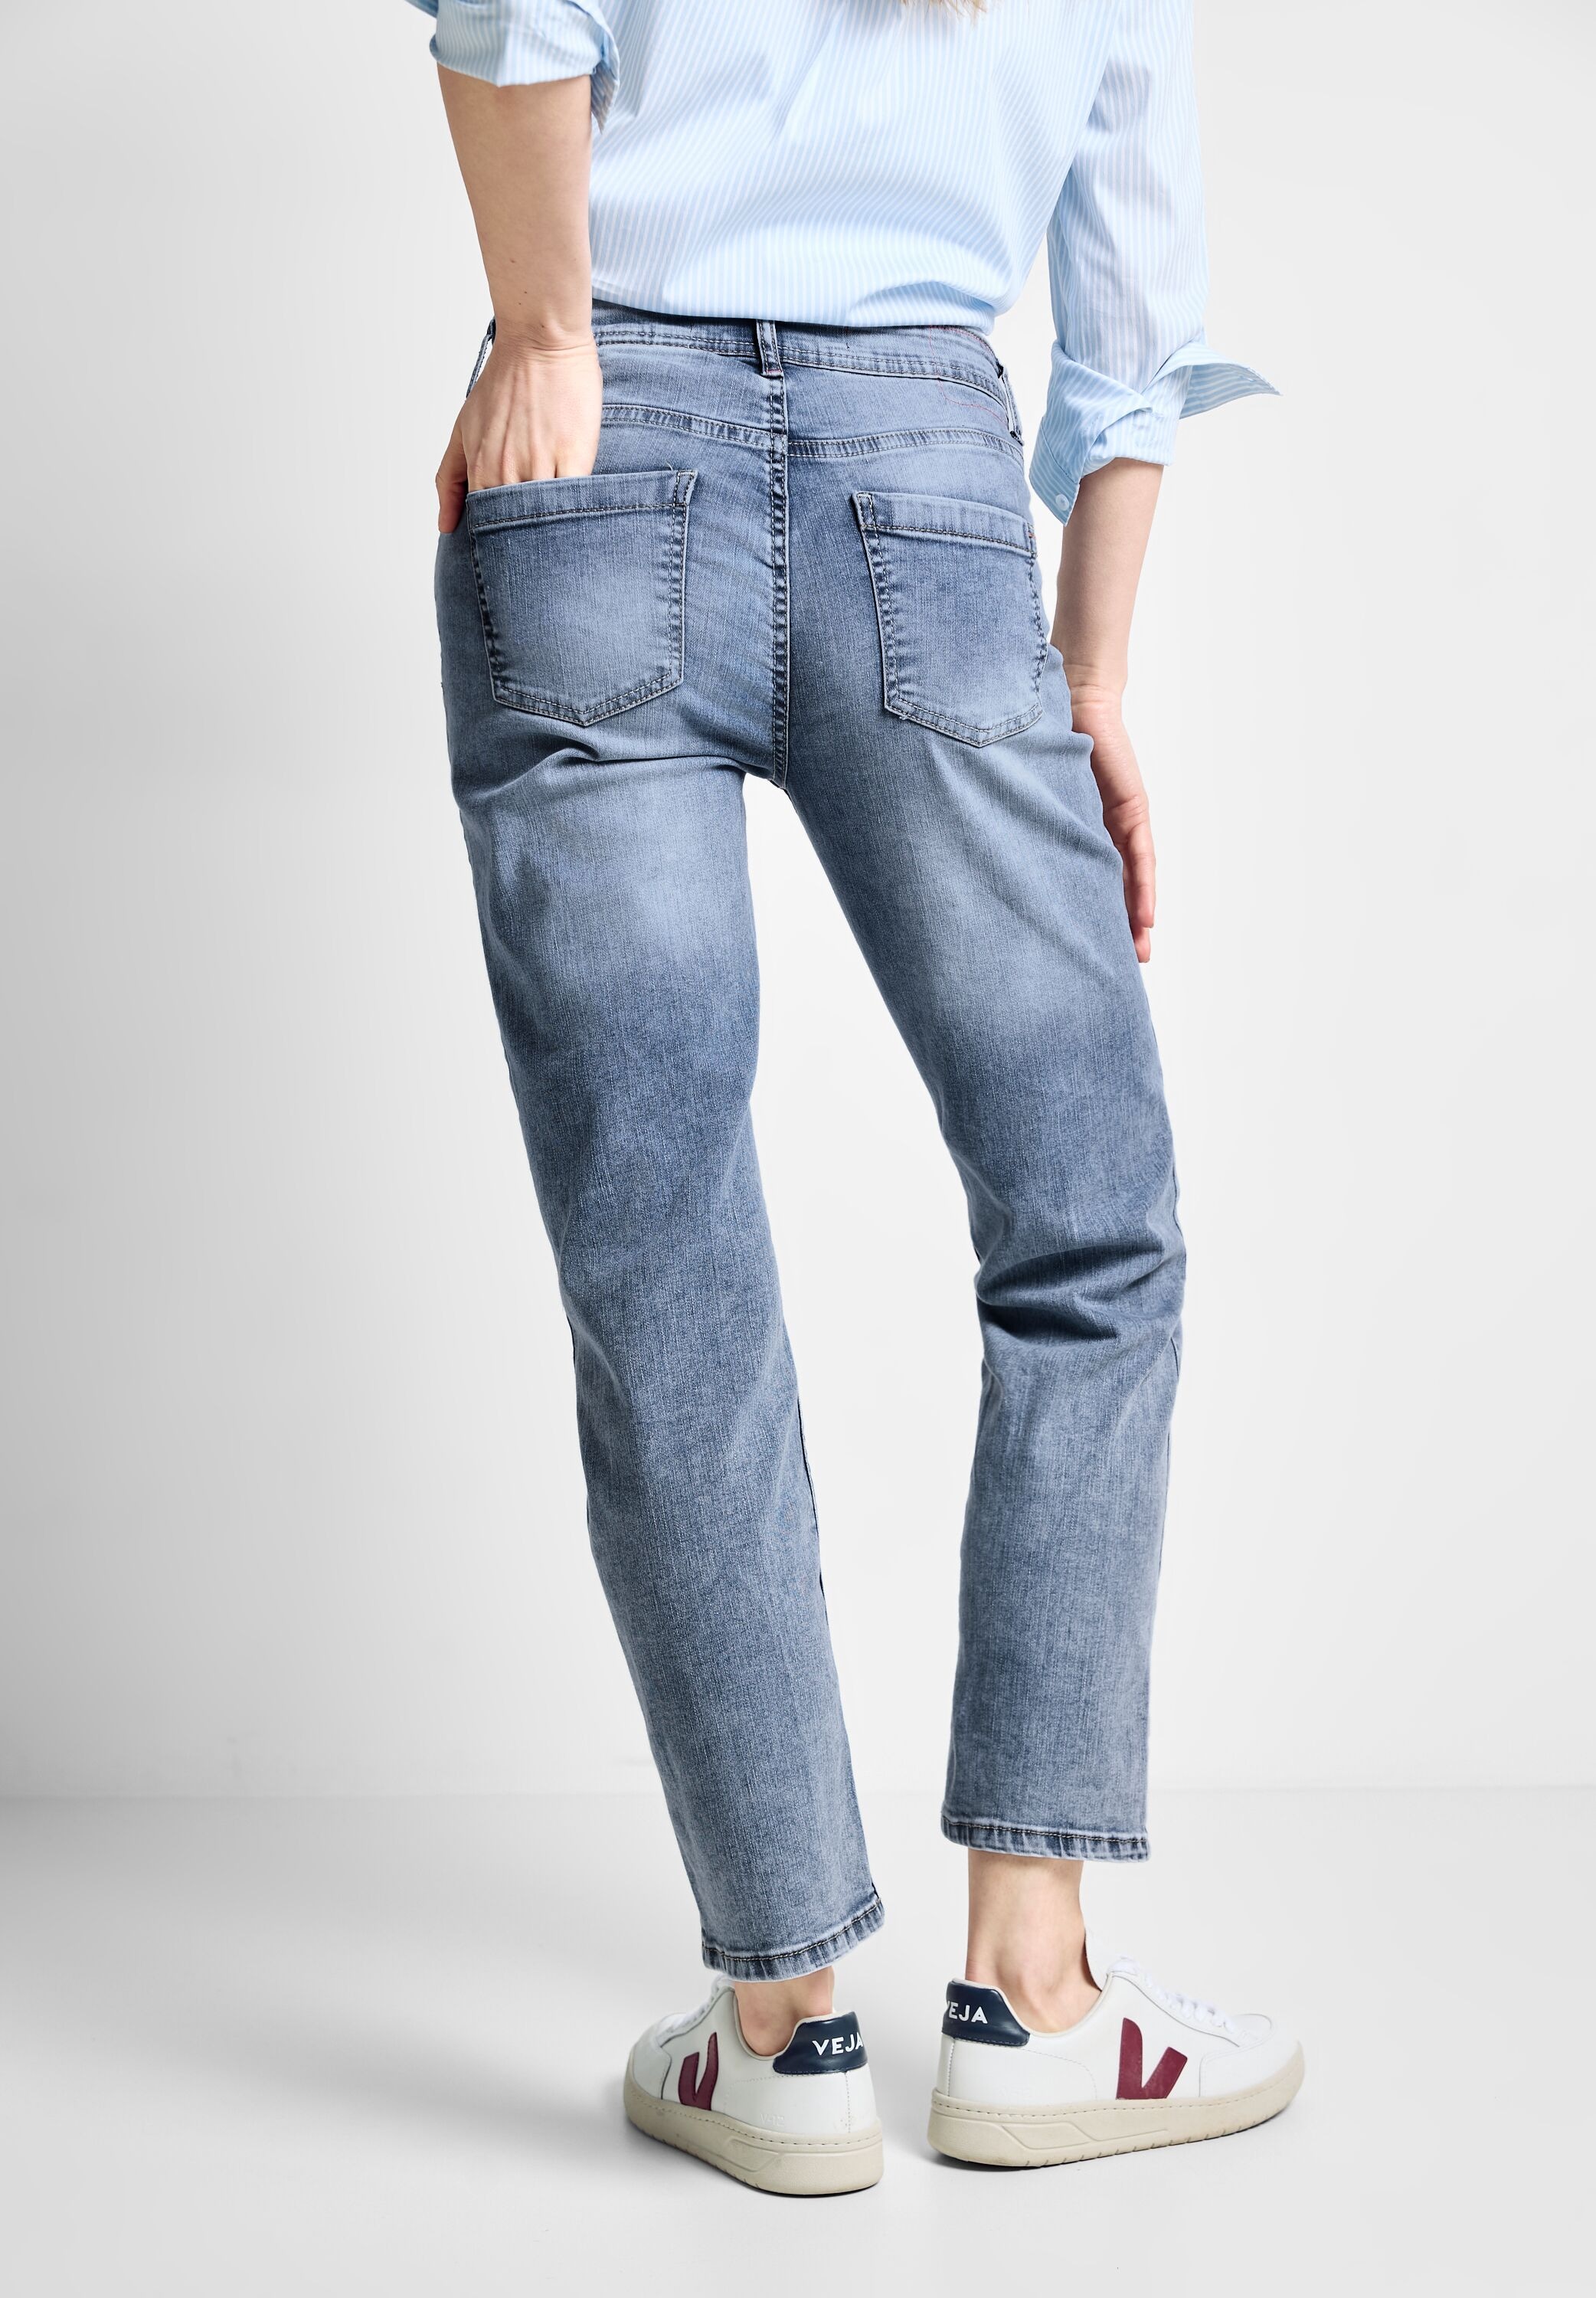 Slim-fit-Jeans, softer Materialmix